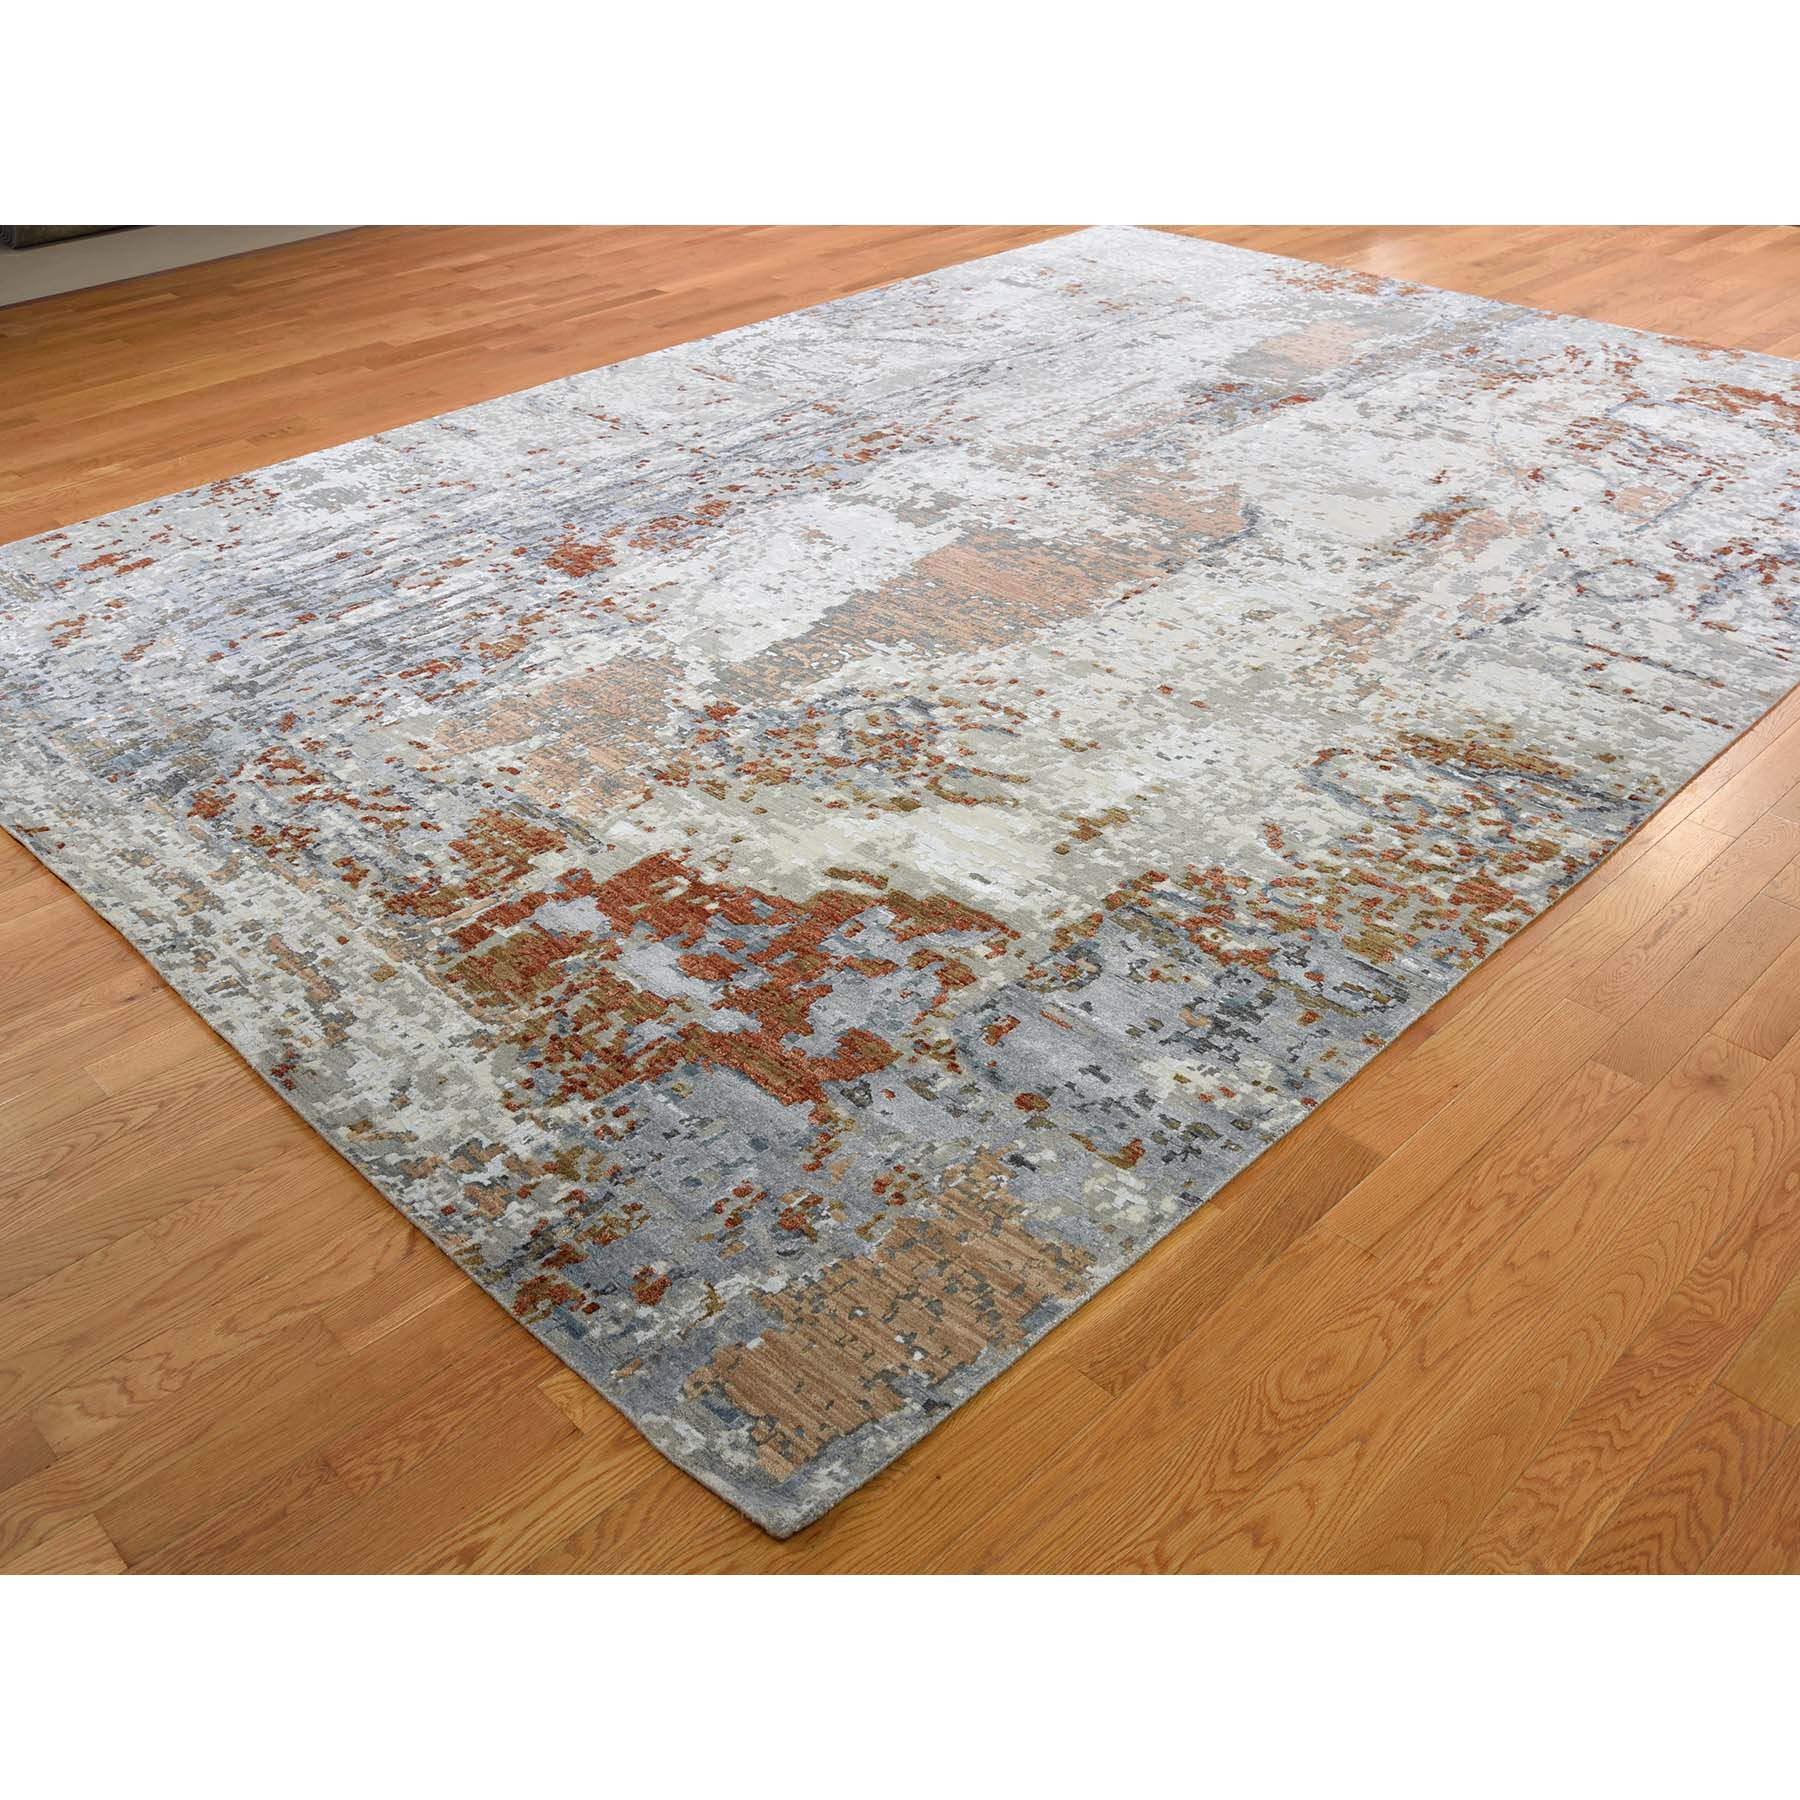 10-x13-10  Silver Hi-Low Pile Abstract Design Wool And Silk Hand-Knotted Oriental Rug 